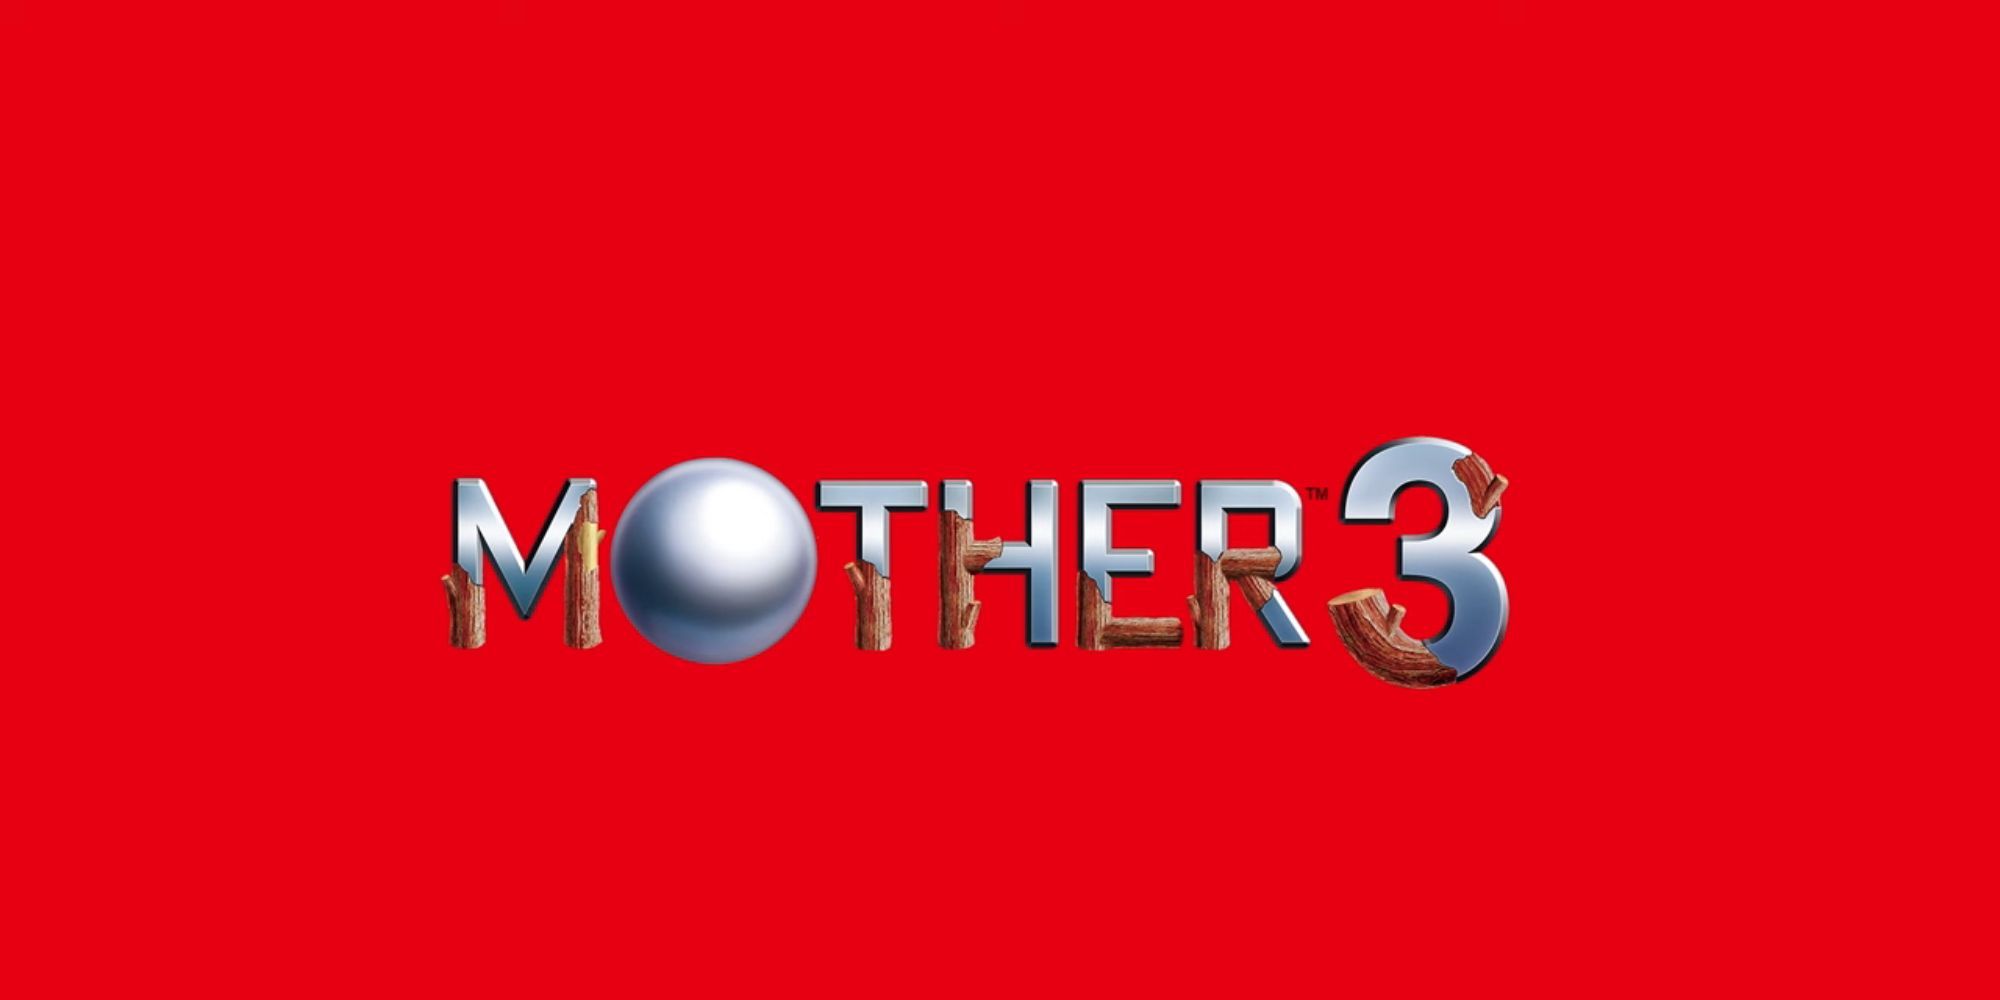 Mother 3 coming to Nintendo Switch Online in Japan.